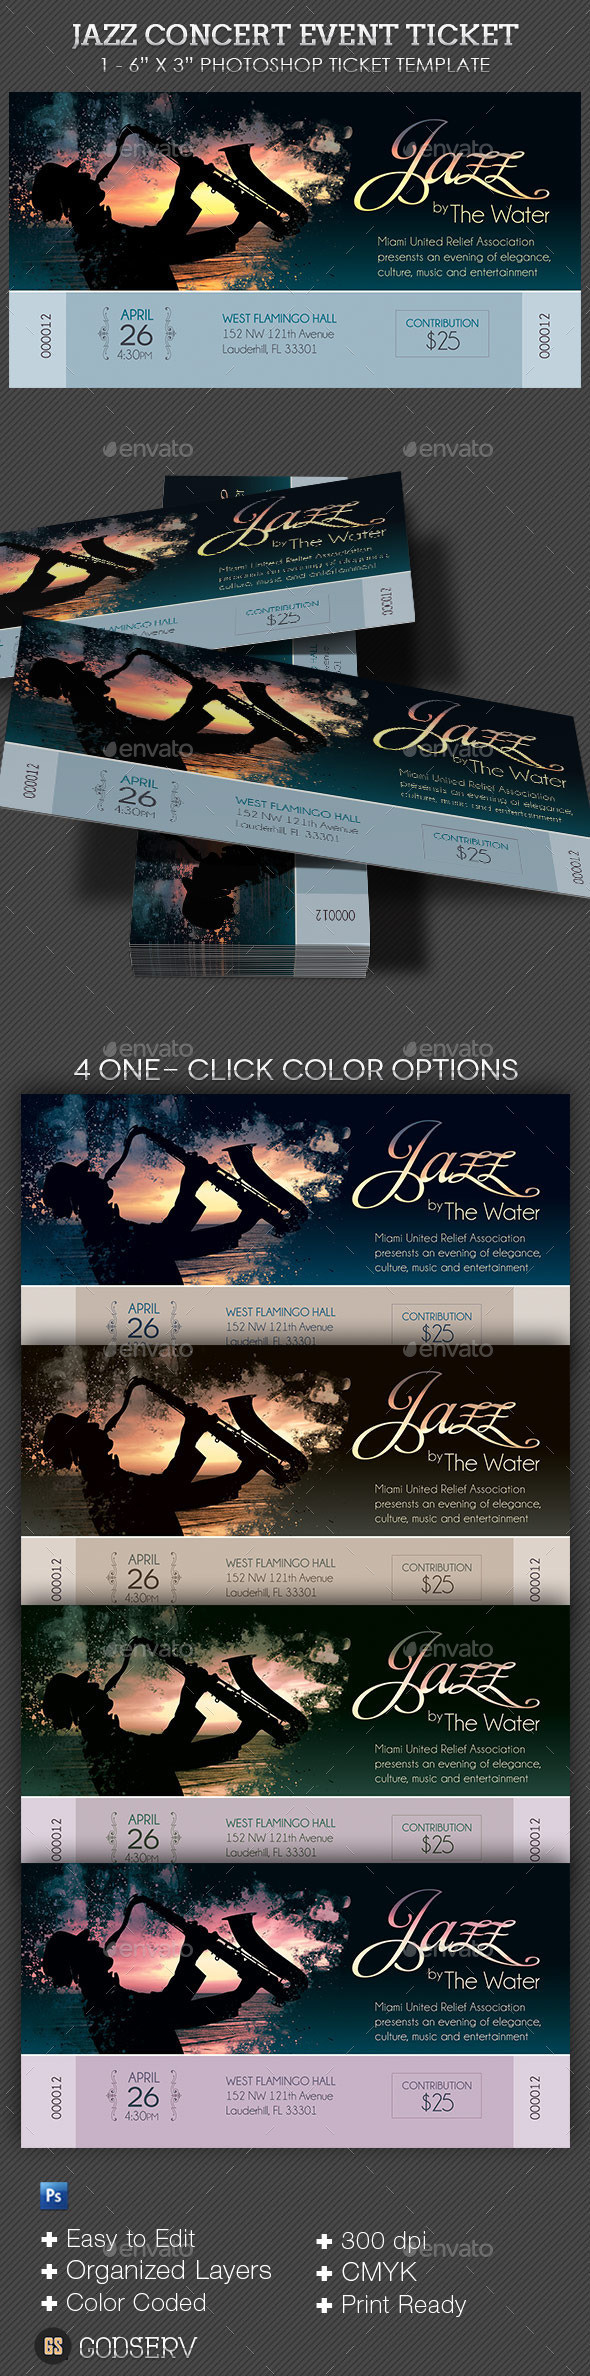 Jazz concert event ticket template preview